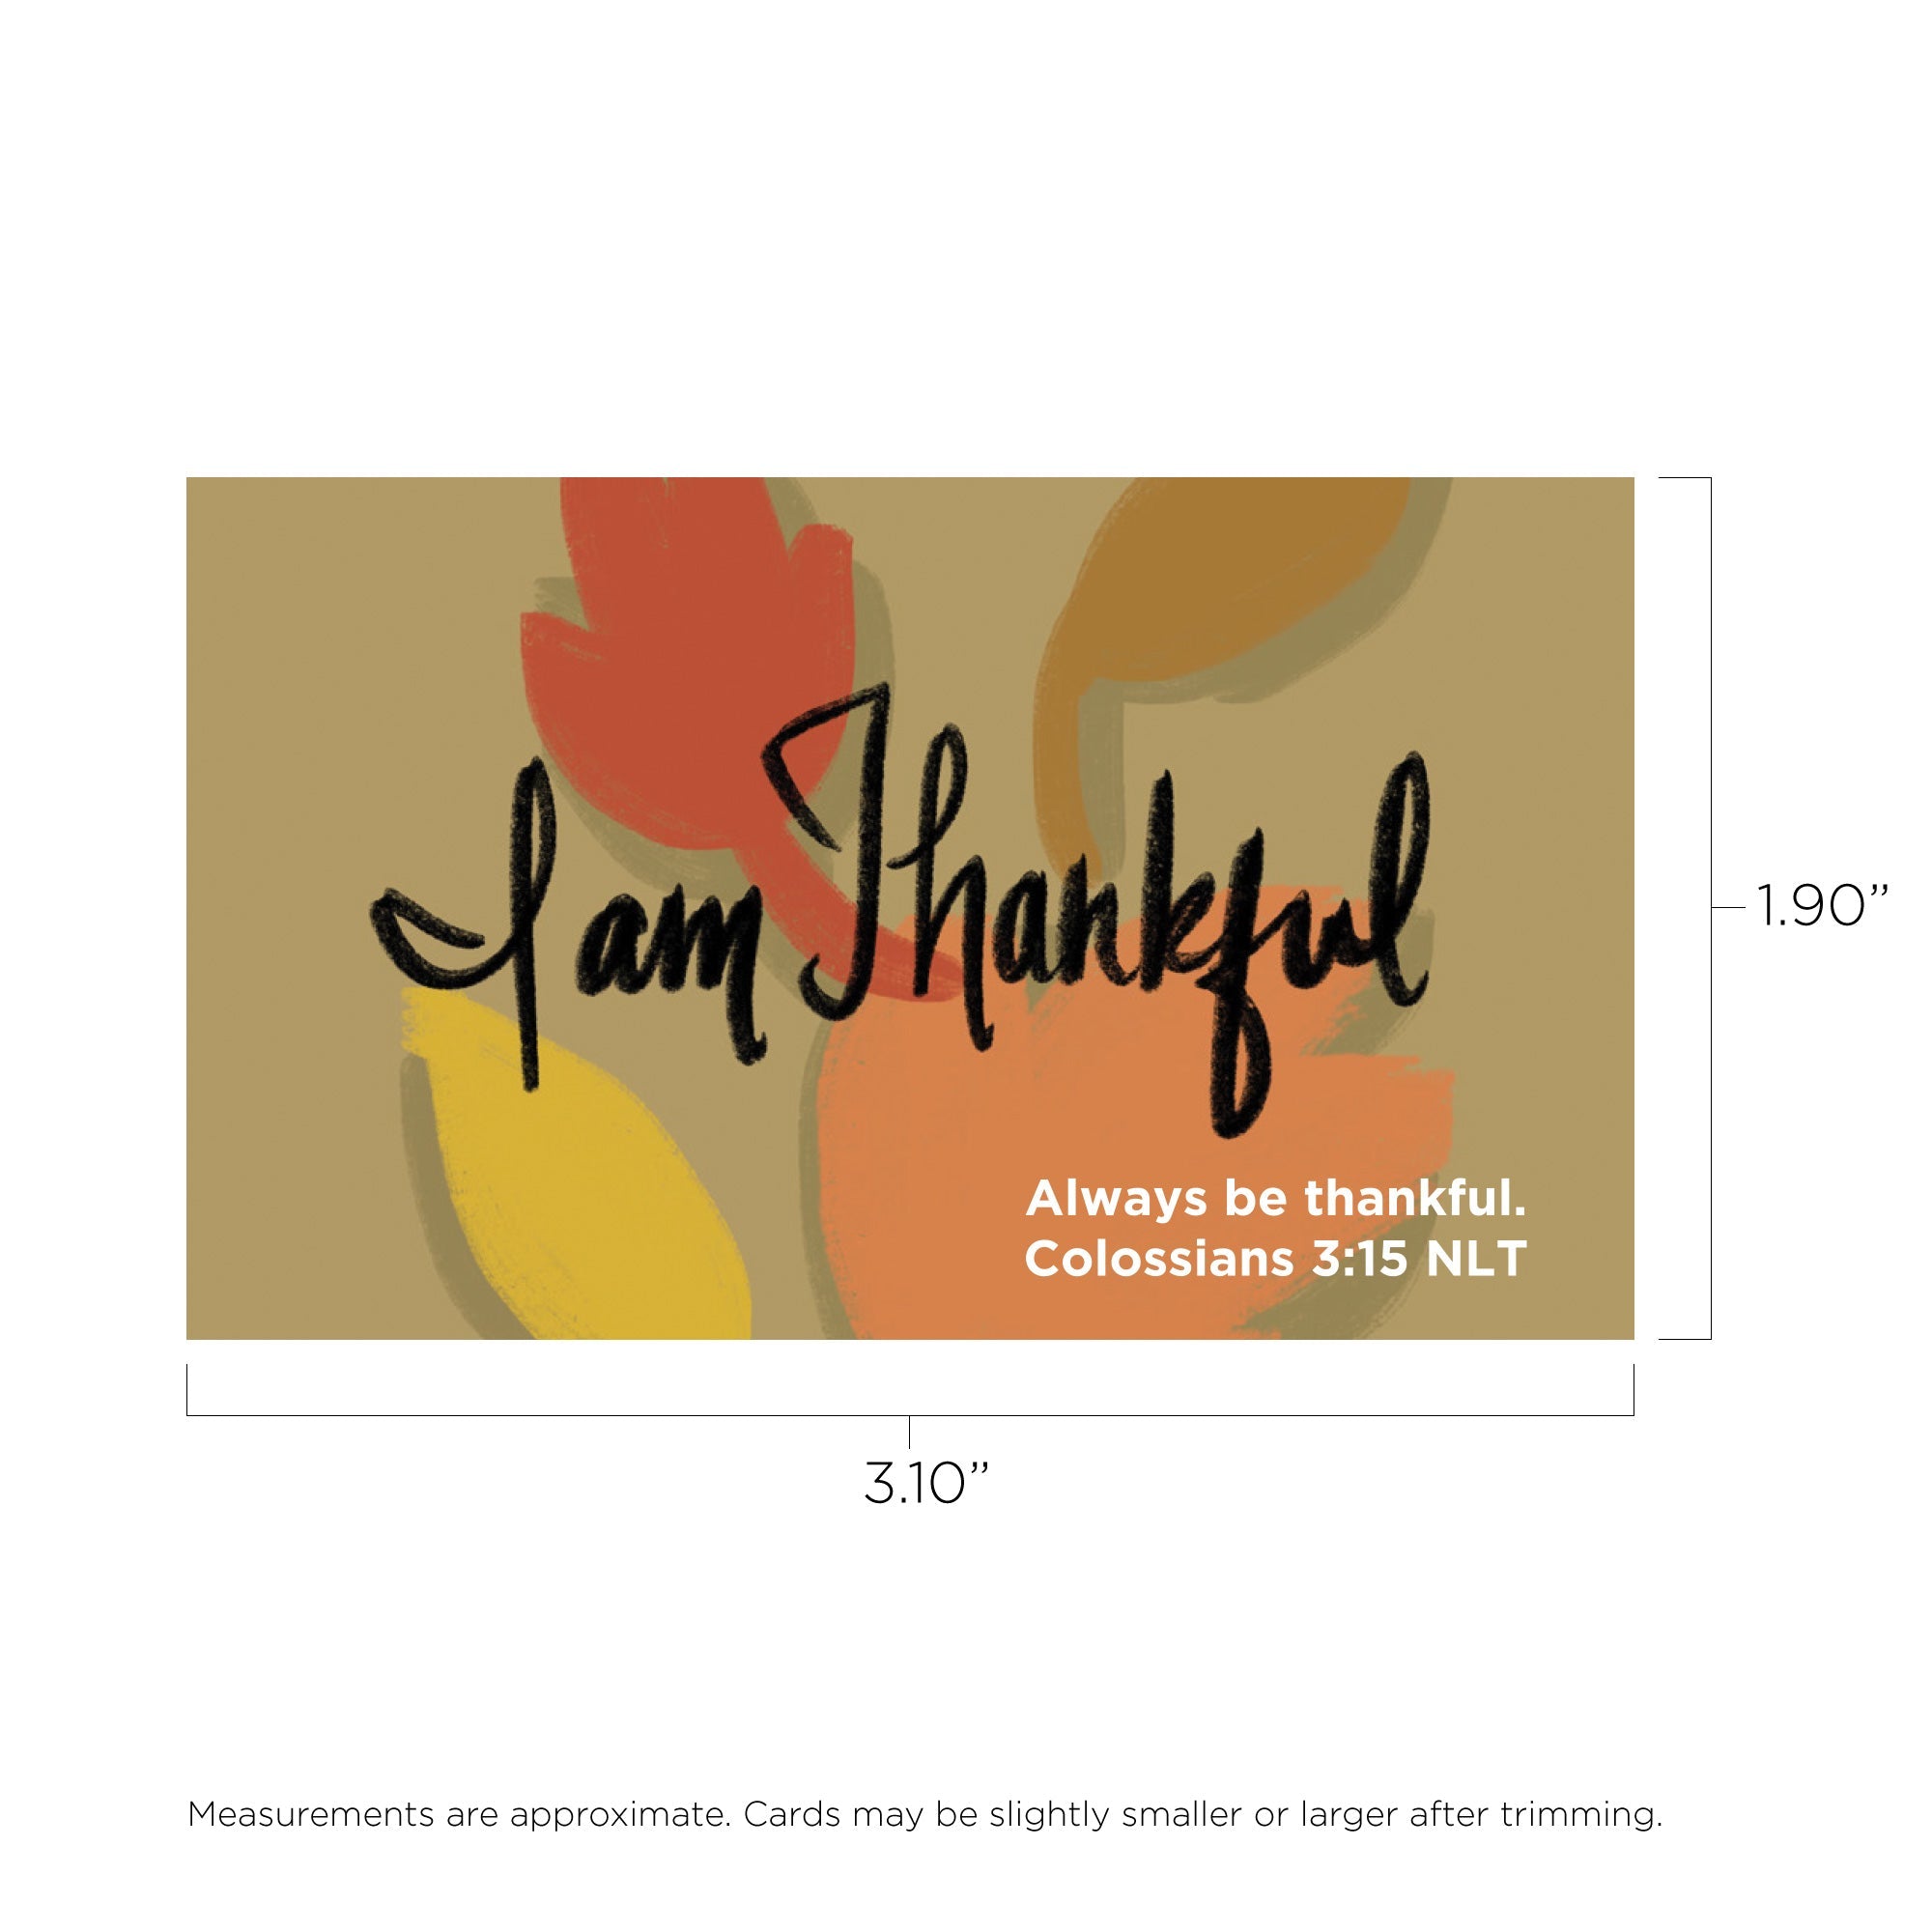 Thanksgiving, Pass Along Scripture Cards, I Am Thankful, Colossians 3:15, Pack of 25